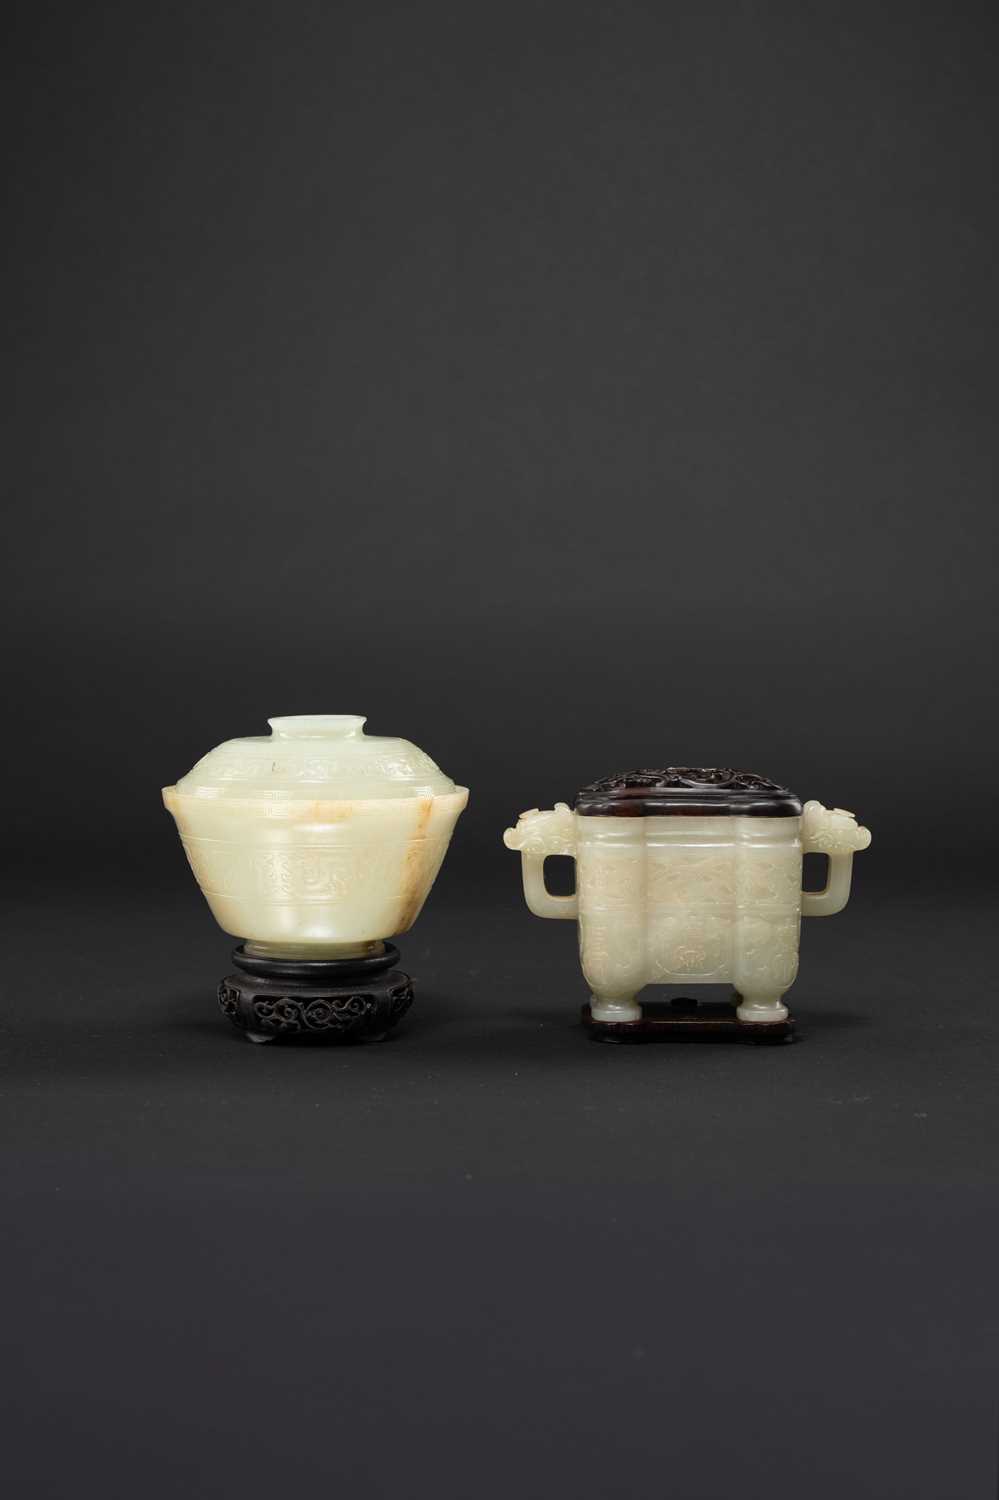 TWO CHINESE CELADON JADE ARCHAISTIC VESSELS 18TH CENTURY One a bowl and cover decorated in low